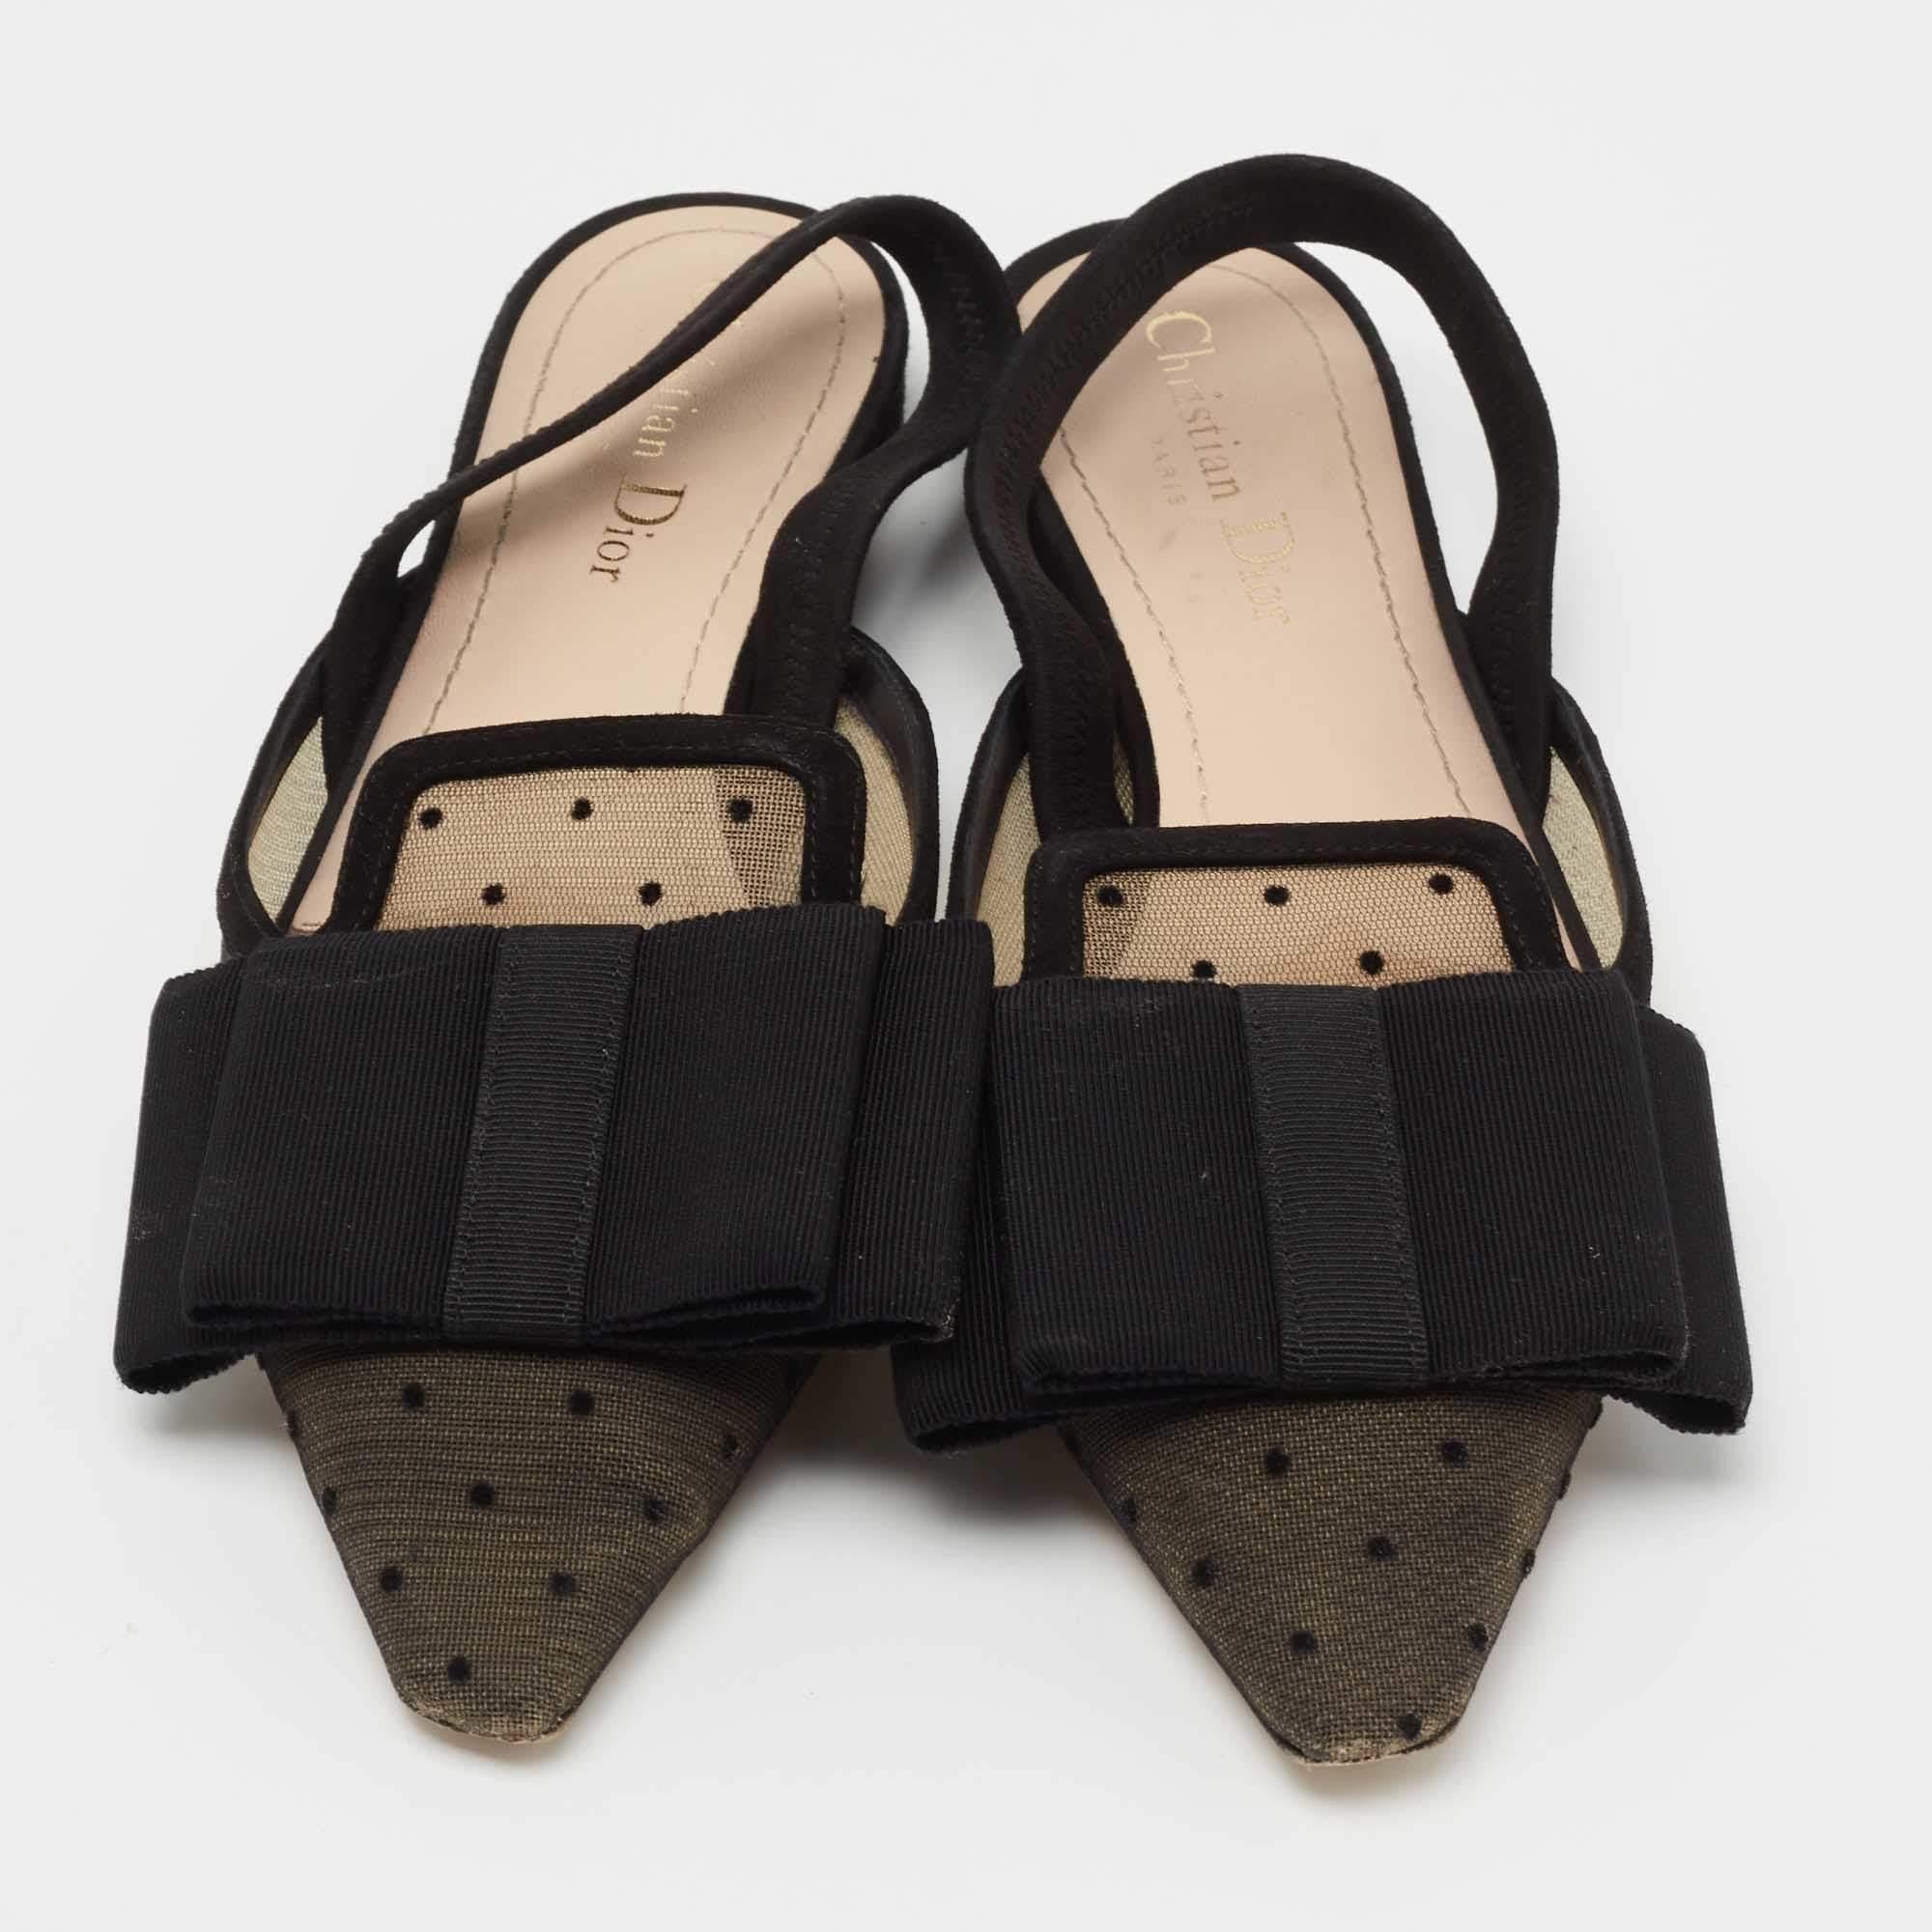 A perfect blend of luxury, style, and comfort, these designer mules are made using quality materials and frame your feet in the most elegant way. They can be paired with a host of outfits from your wardrobe.
 
Includes: Original Dustbag, Original